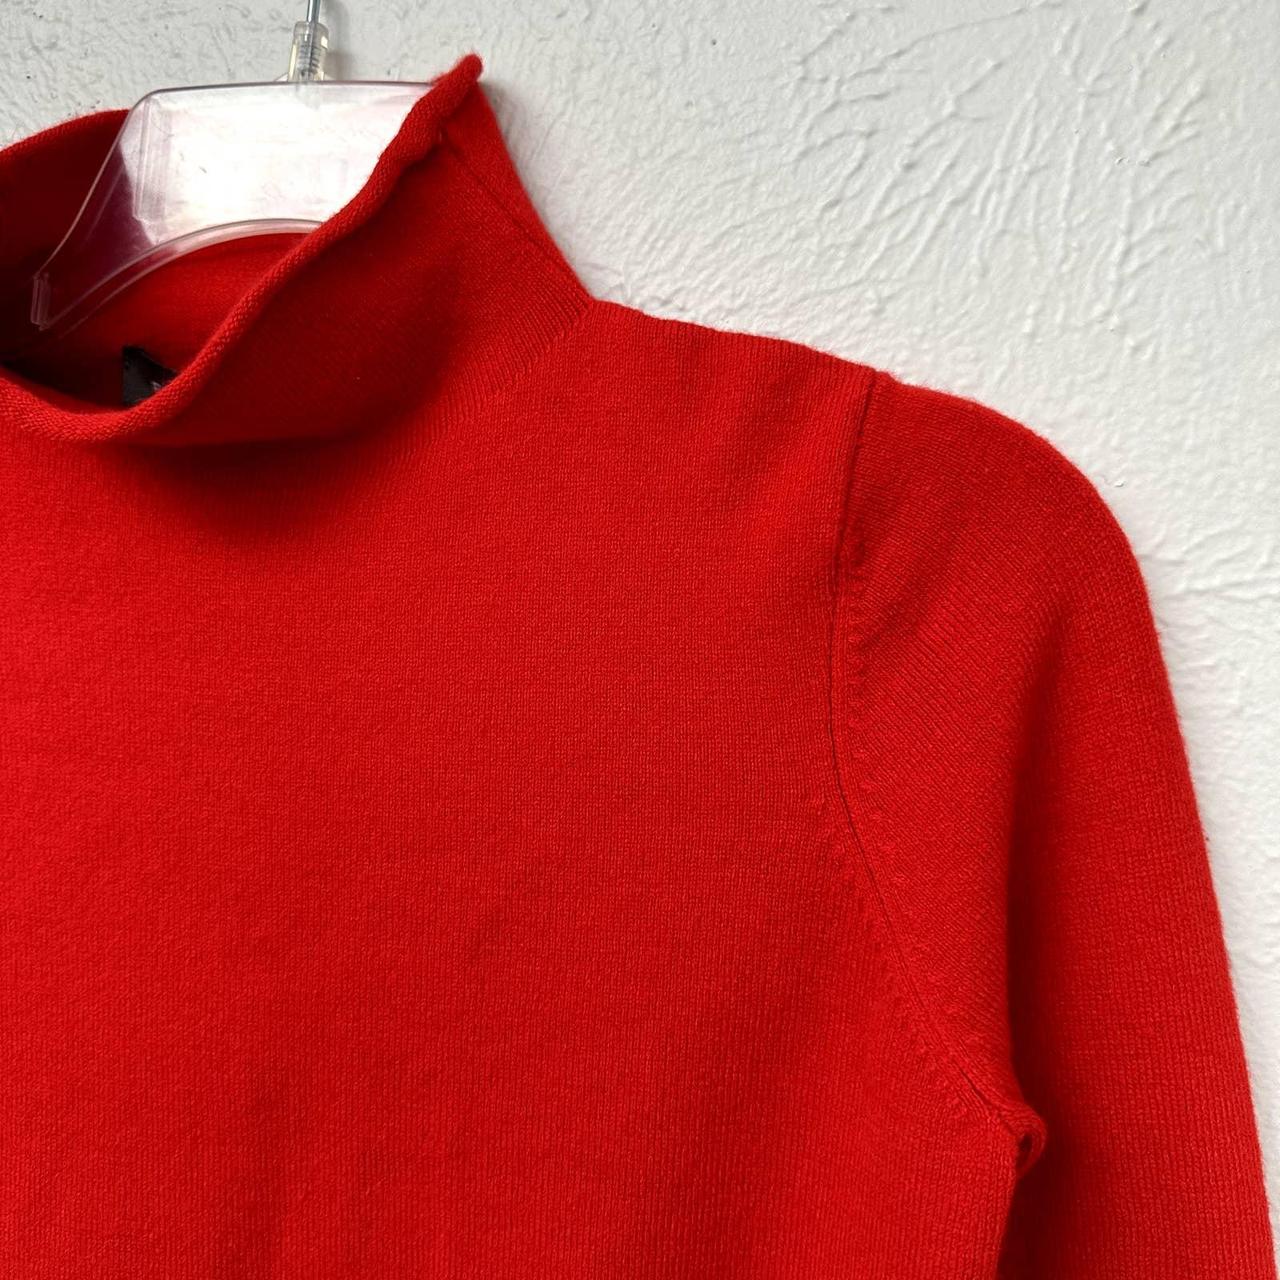 I managed to find this beautiful vibrant red french - Depop